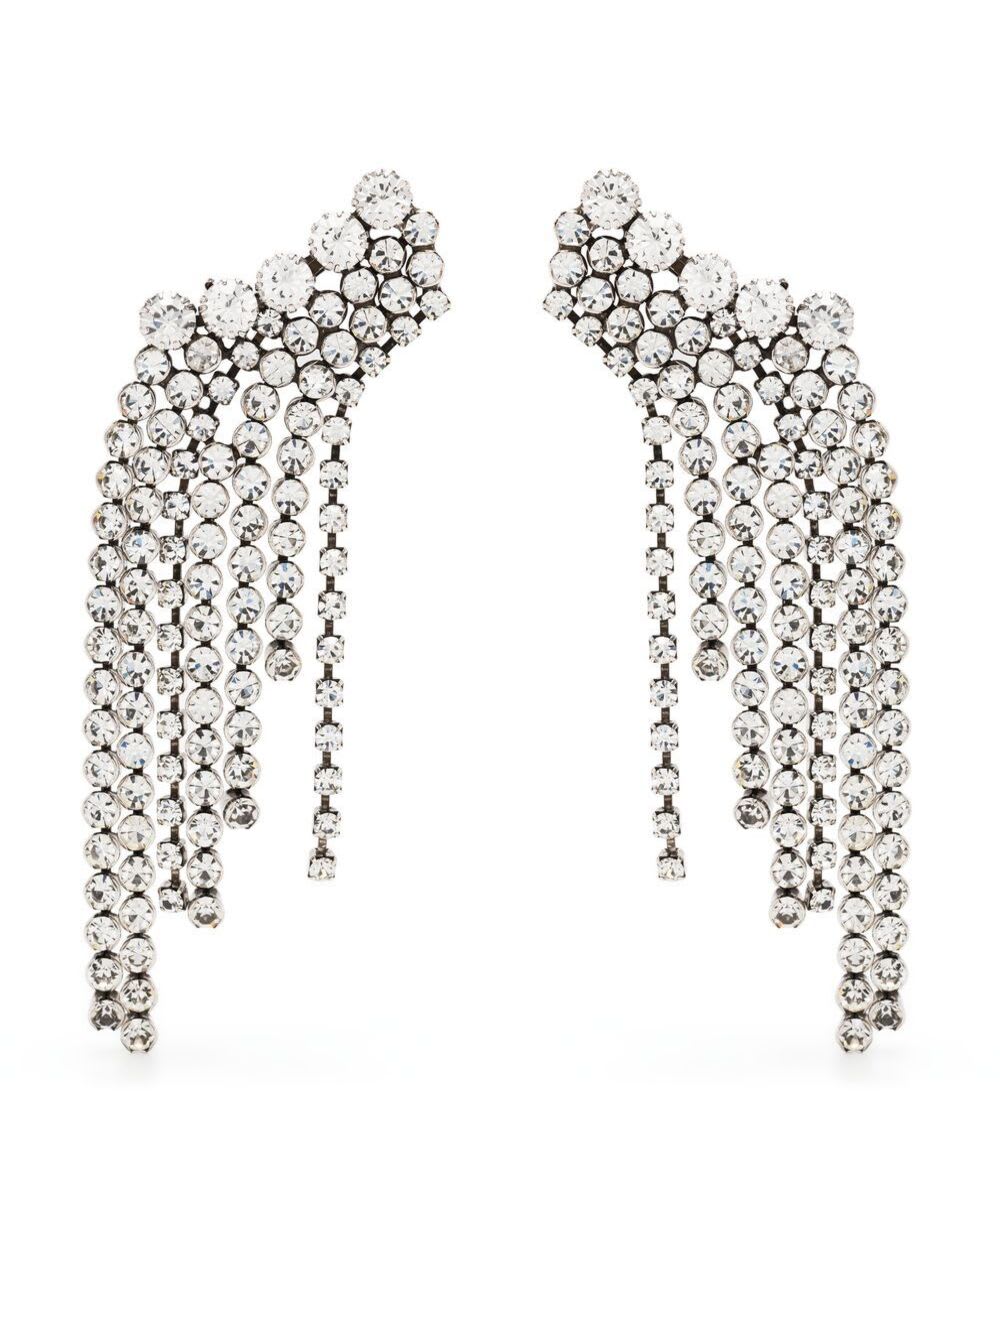 ISABEL MARANT A WILD SHORE DROP EARRINGS WITH TRANSPARENT GLASS PENDANTS IN BRASS WOMAN ISABEL MARANT